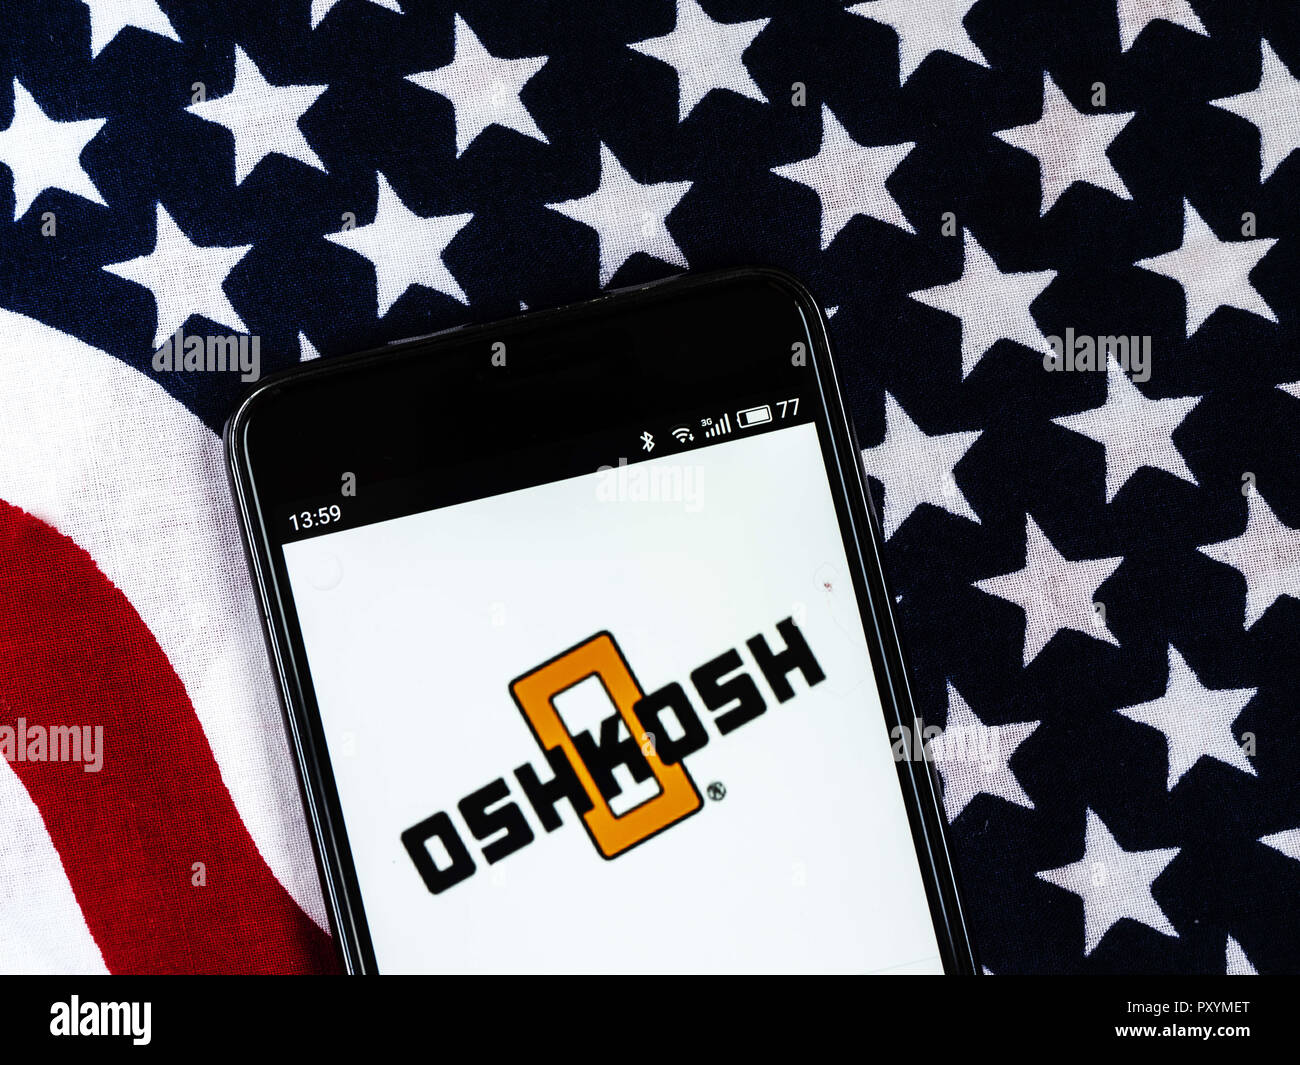 Kiev, Ukraine. 24th Oct, 2018. Oshkosh Corporation Defence industry company logo seen displayed on smart phone. Oshkosh Corporation, formerly Oshkosh Truck, is an American industrial company that designs and builds specialty trucks, military vehicles, truck bodies, airport fire apparatus and access equipment. Credit: Igor Golovniov/SOPA Images/ZUMA Wire/Alamy Live News Stock Photo